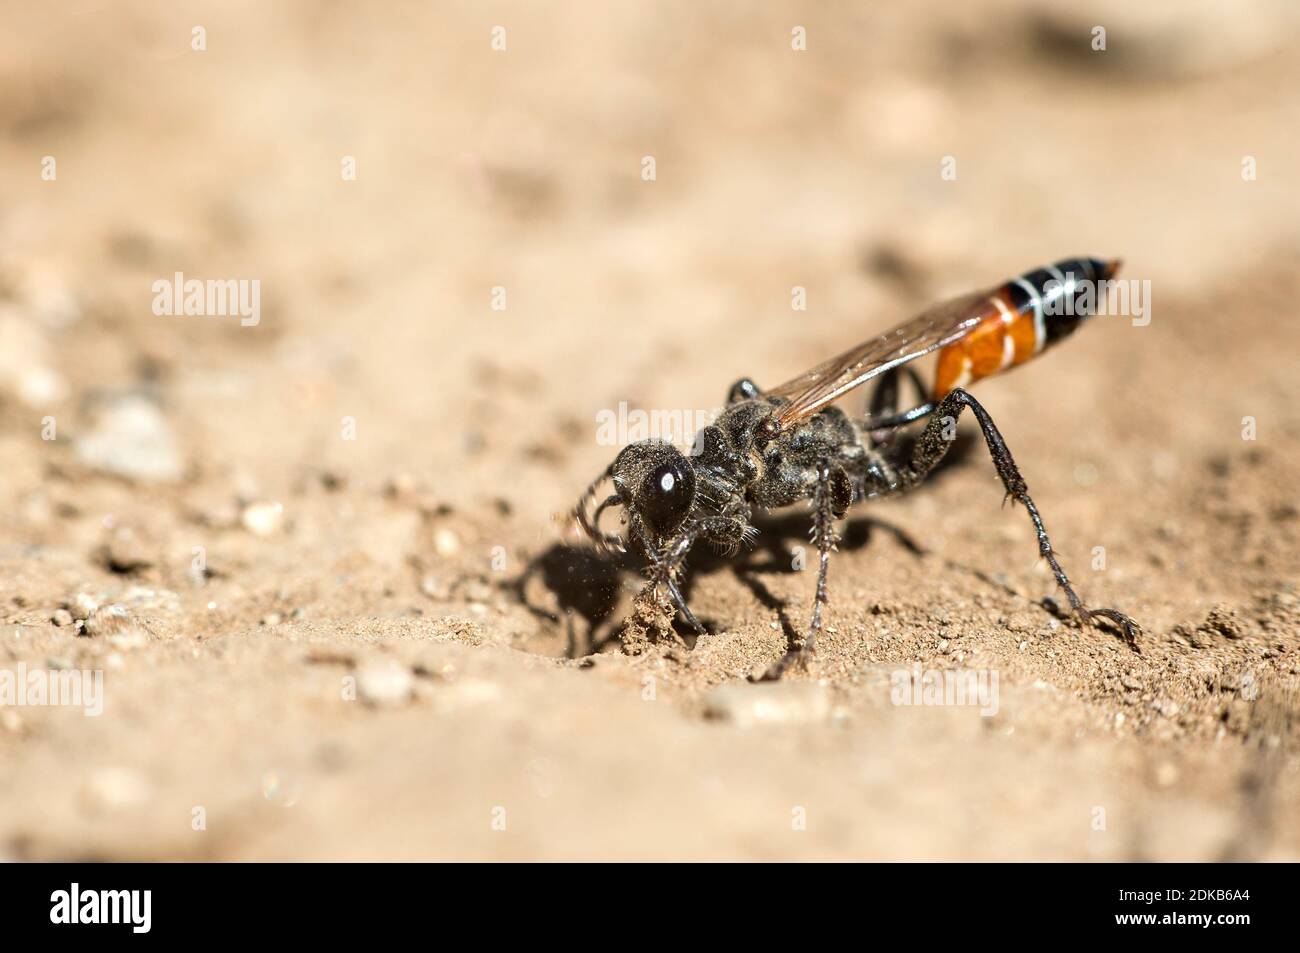 Female of Prionyx kirbii, a thread-waisted wasp, digging a tunnel in sandy soil, preparing vor nesting, from the Sphecidae family, Valais, Switzerland Stock Photo